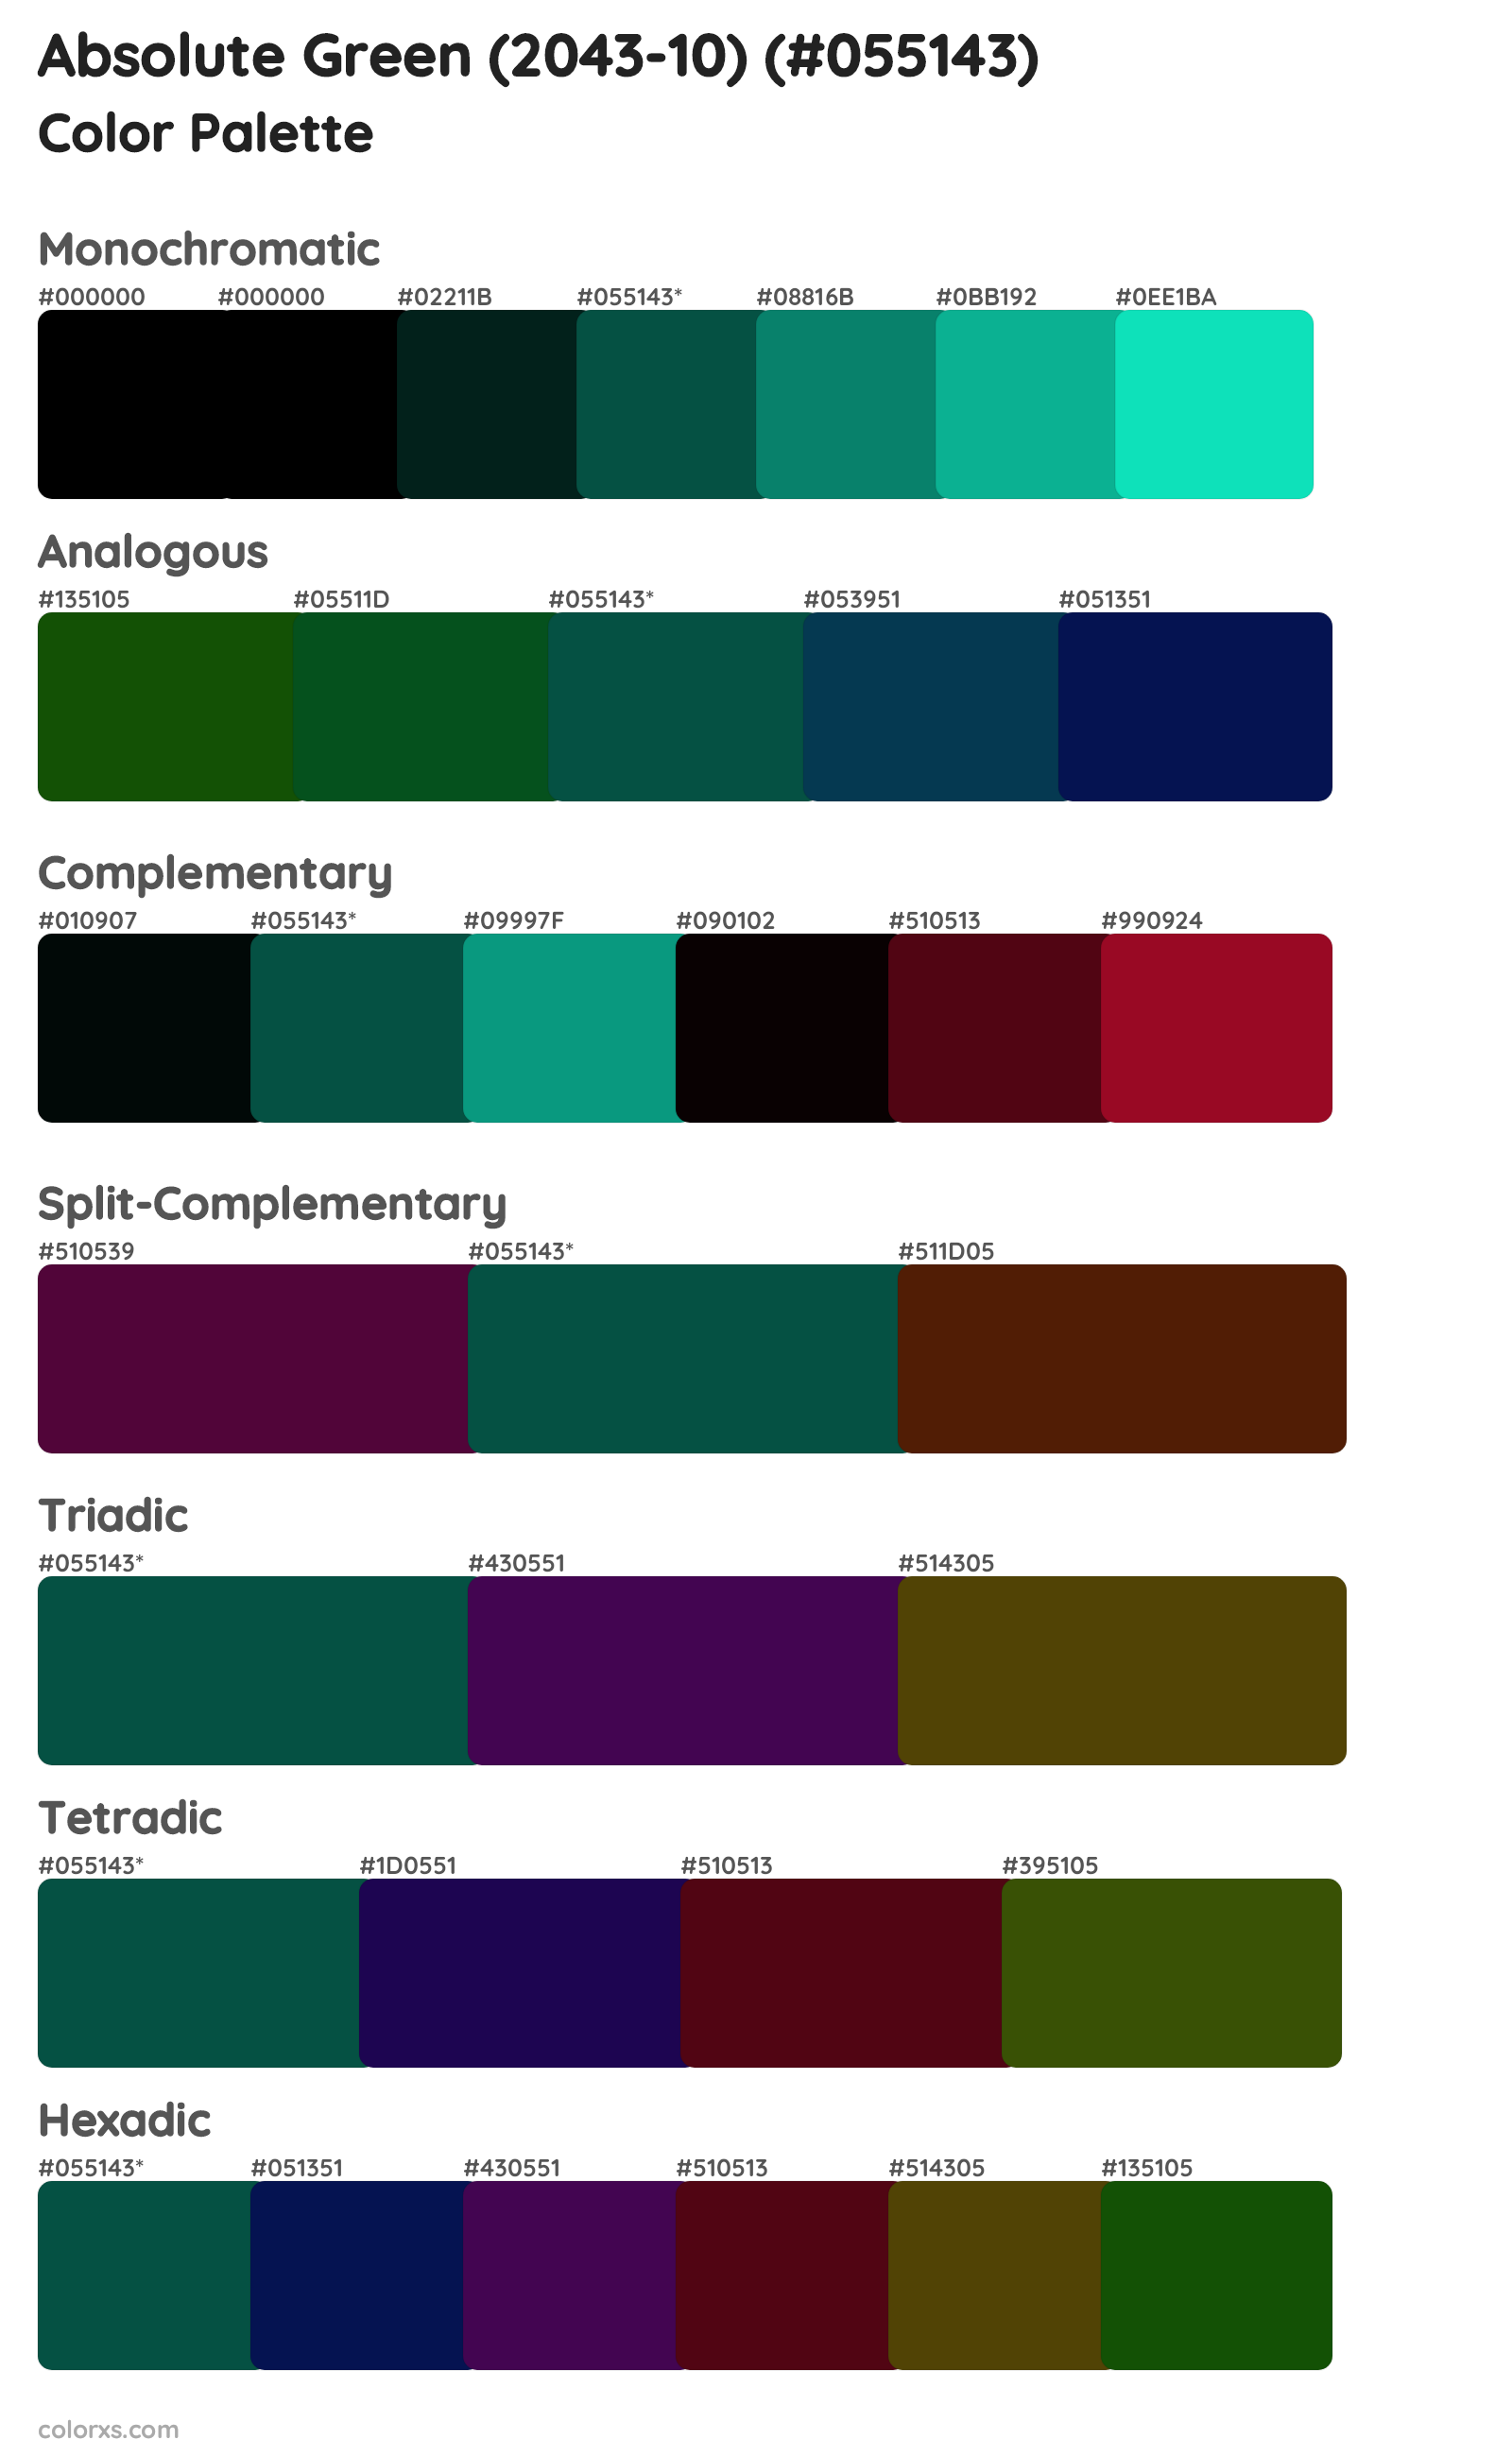 Absolute Green (2043-10) Color Scheme Palettes